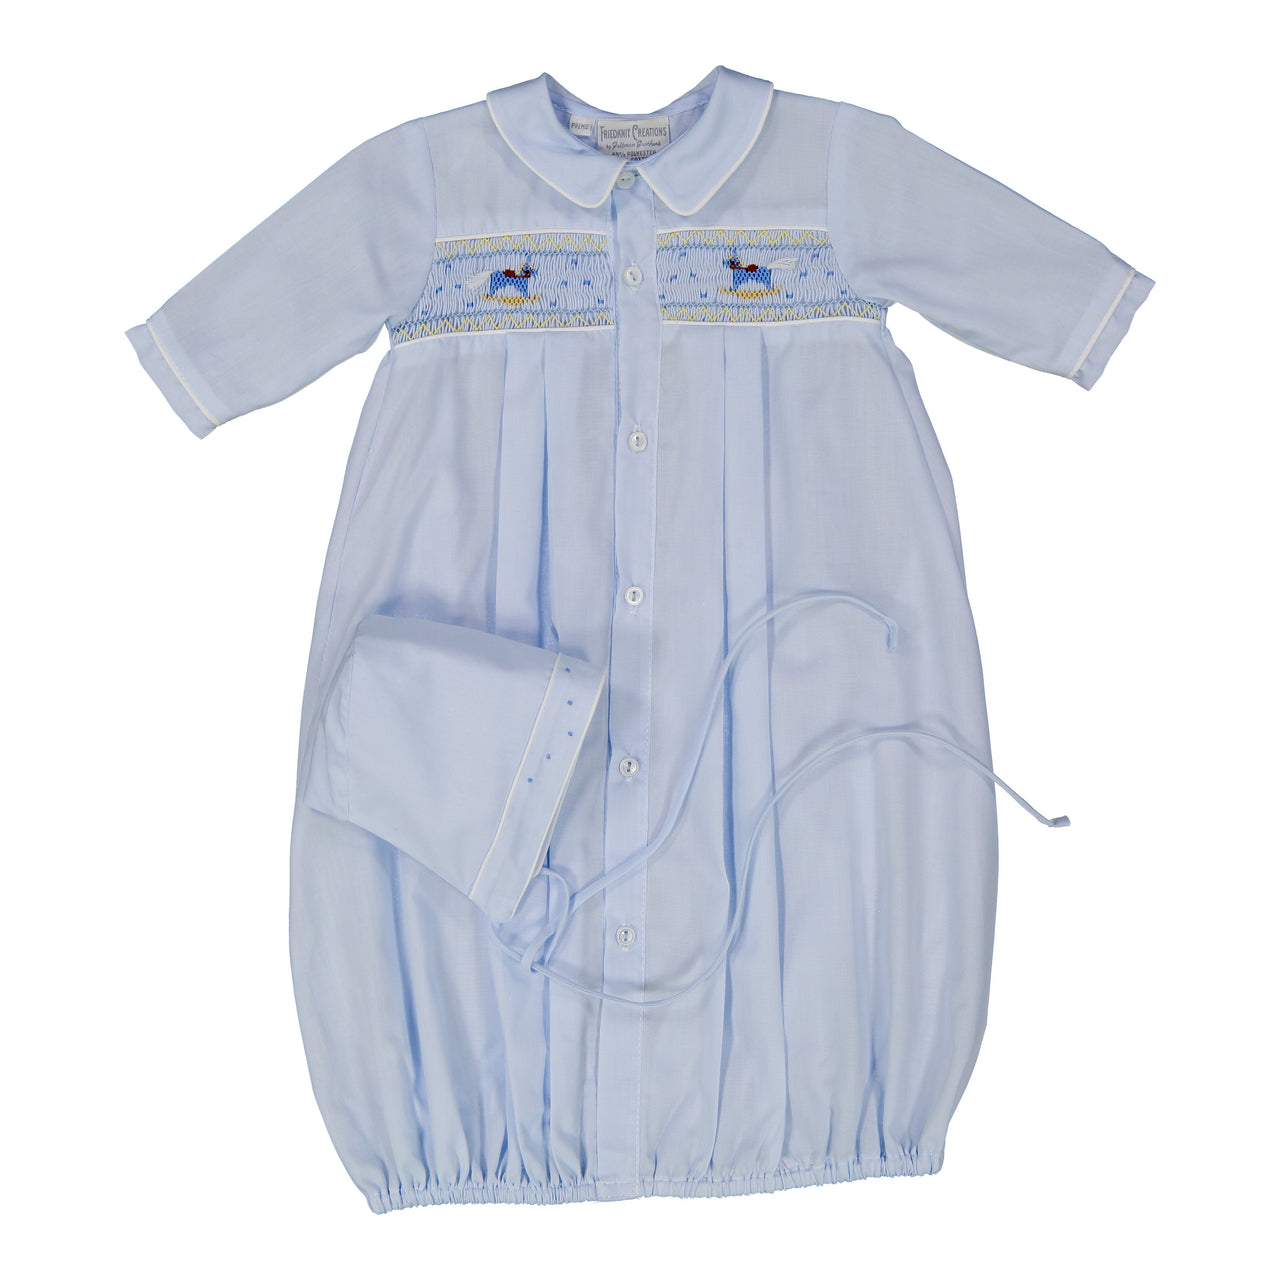 Feltman Brothers Rocking Horse Smocked Gown Blue Pr P1186 5010